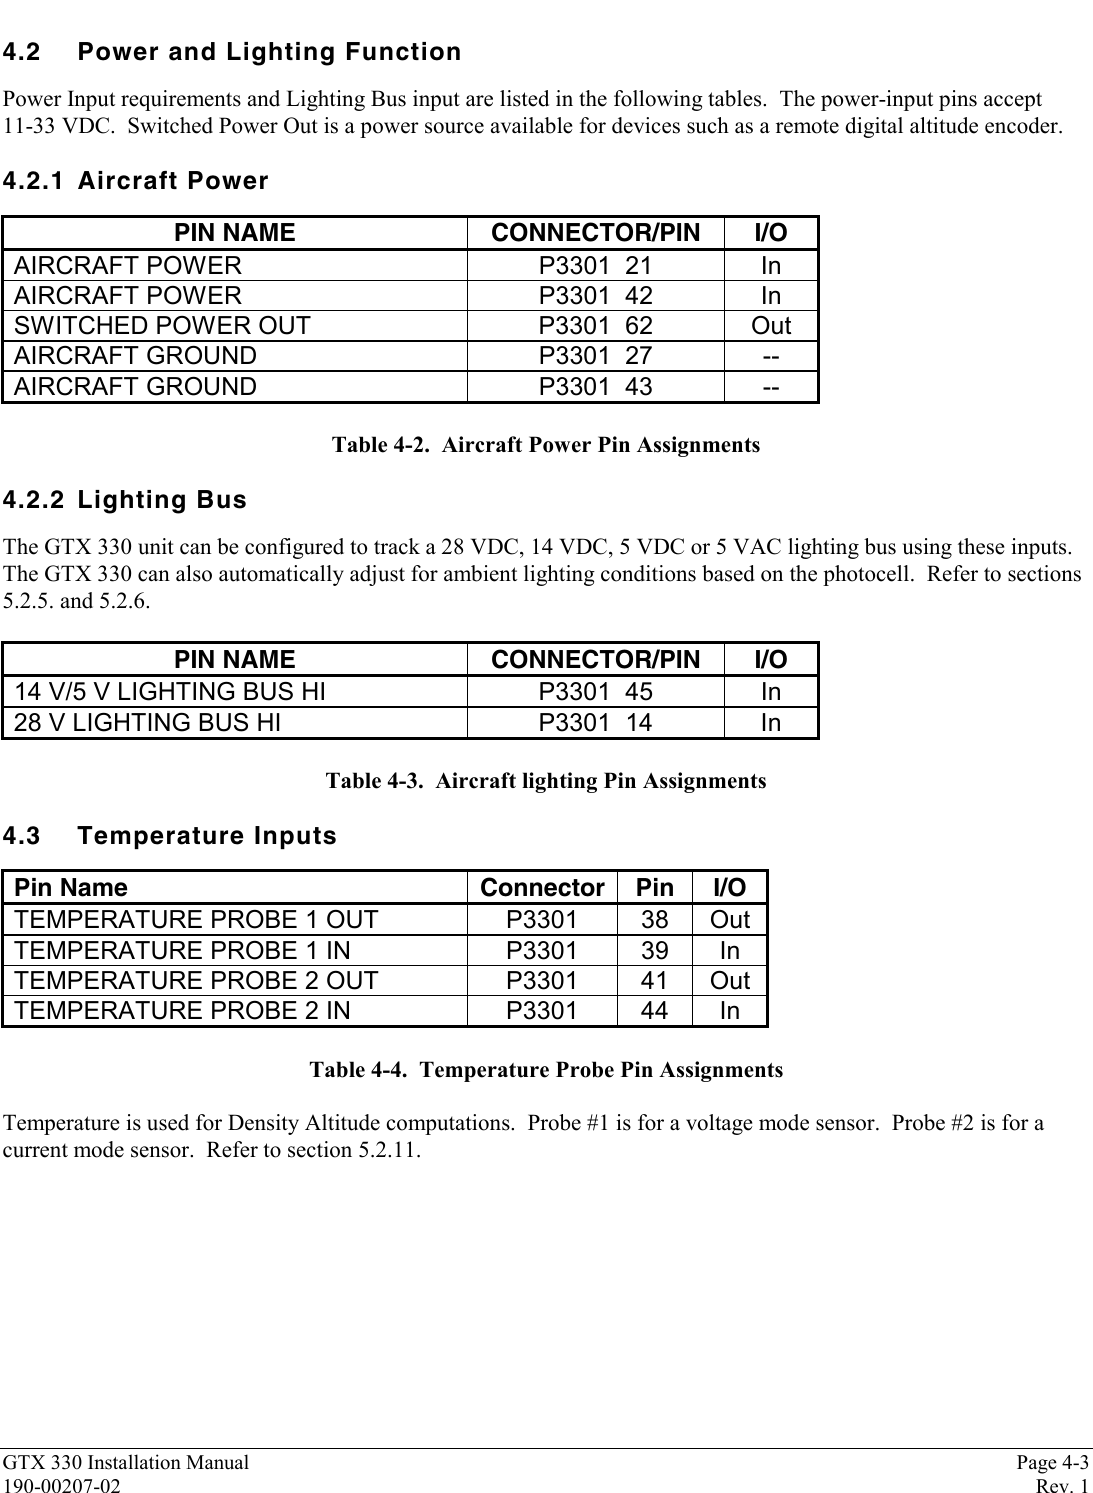 GTX 330 Installation Manual Page 4-3190-00207-02 Rev. 14.2 Power and Lighting FunctionPower Input requirements and Lighting Bus input are listed in the following tables.  The power-input pins accept11-33 VDC.  Switched Power Out is a power source available for devices such as a remote digital altitude encoder.4.2.1 Aircraft PowerPIN NAME CONNECTOR/PIN I/OAIRCRAFT POWER P3301  21 InAIRCRAFT POWER P3301  42 InSWITCHED POWER OUT P3301  62 OutAIRCRAFT GROUND P3301  27 --AIRCRAFT GROUND P3301  43 --Table 4-2.  Aircraft Power Pin Assignments4.2.2 Lighting BusThe GTX 330 unit can be configured to track a 28 VDC, 14 VDC, 5 VDC or 5 VAC lighting bus using these inputs.The GTX 330 can also automatically adjust for ambient lighting conditions based on the photocell.  Refer to sections5.2.5. and 5.2.6.PIN NAME CONNECTOR/PIN I/O14 V/5 V LIGHTING BUS HI P3301  45 In28 V LIGHTING BUS HI P3301  14 InTable 4-3.  Aircraft lighting Pin Assignments4.3 Temperature InputsPin Name Connector Pin I/OTEMPERATURE PROBE 1 OUT P3301 38 OutTEMPERATURE PROBE 1 IN P3301 39 InTEMPERATURE PROBE 2 OUT P3301 41 OutTEMPERATURE PROBE 2 IN P3301 44 InTable 4-4.  Temperature Probe Pin AssignmentsTemperature is used for Density Altitude computations.  Probe #1 is for a voltage mode sensor.  Probe #2 is for acurrent mode sensor.  Refer to section 5.2.11.